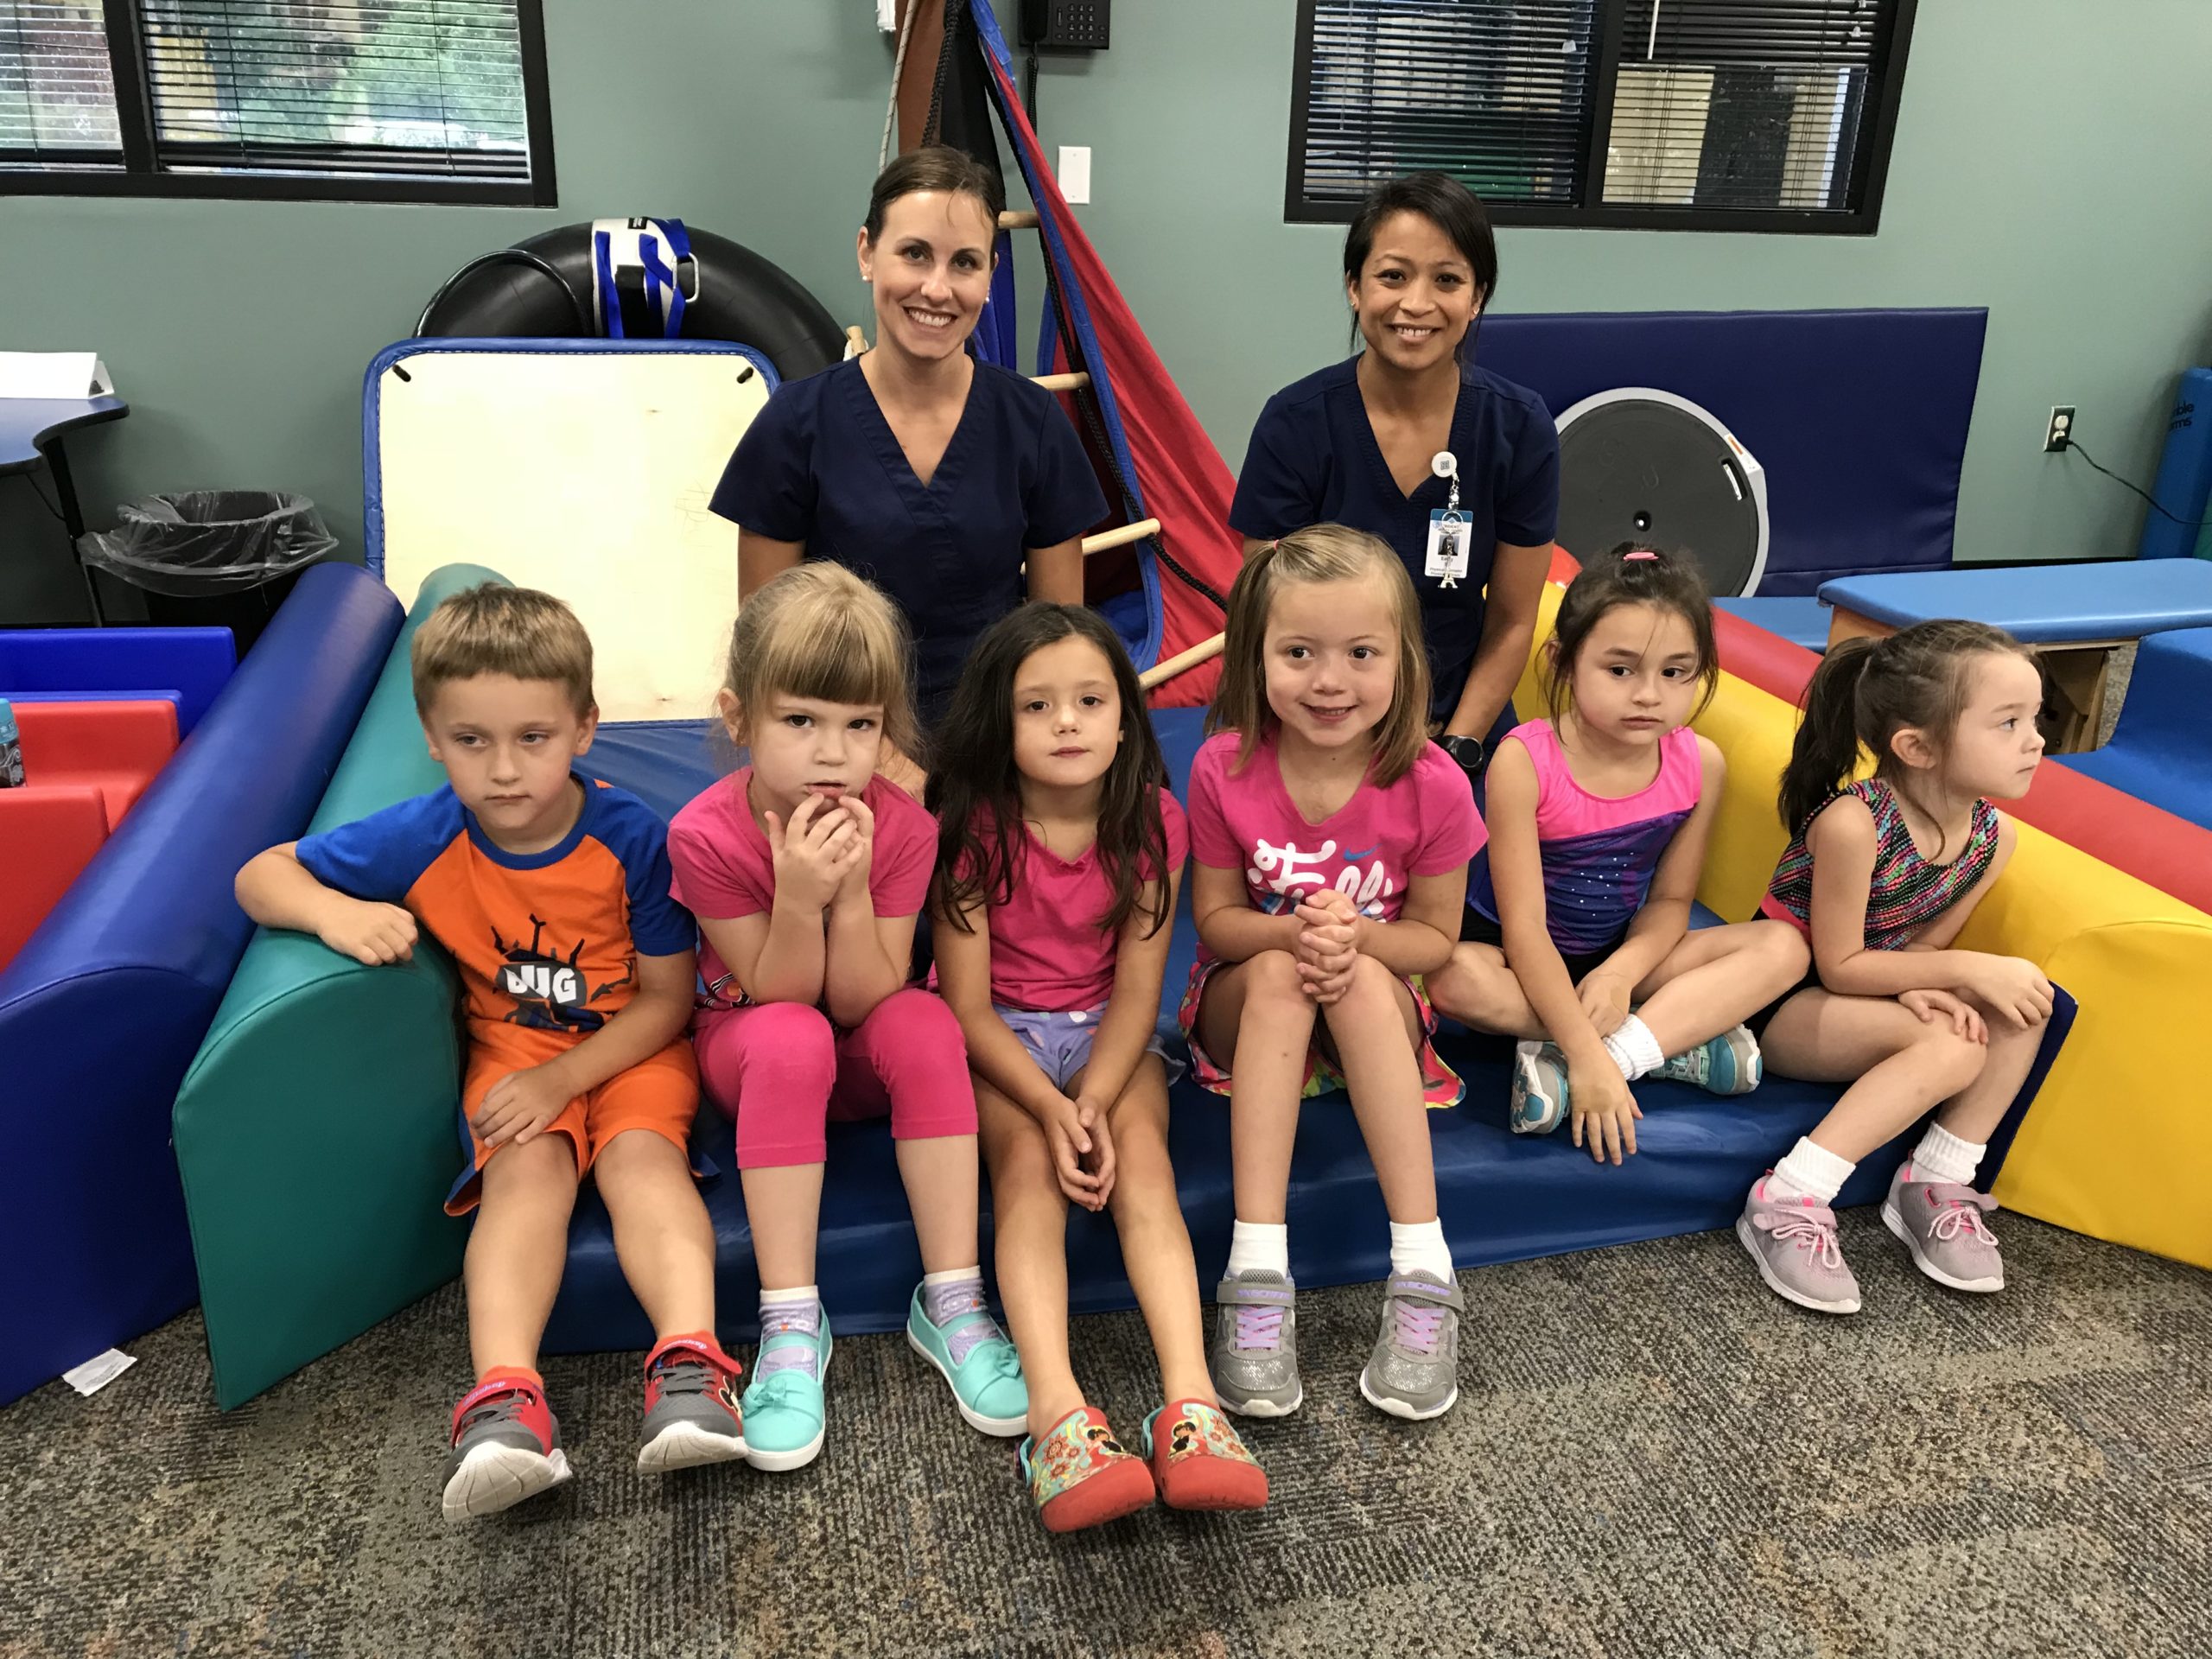 Two female physical therapists posing with a group of kids during a yoga class